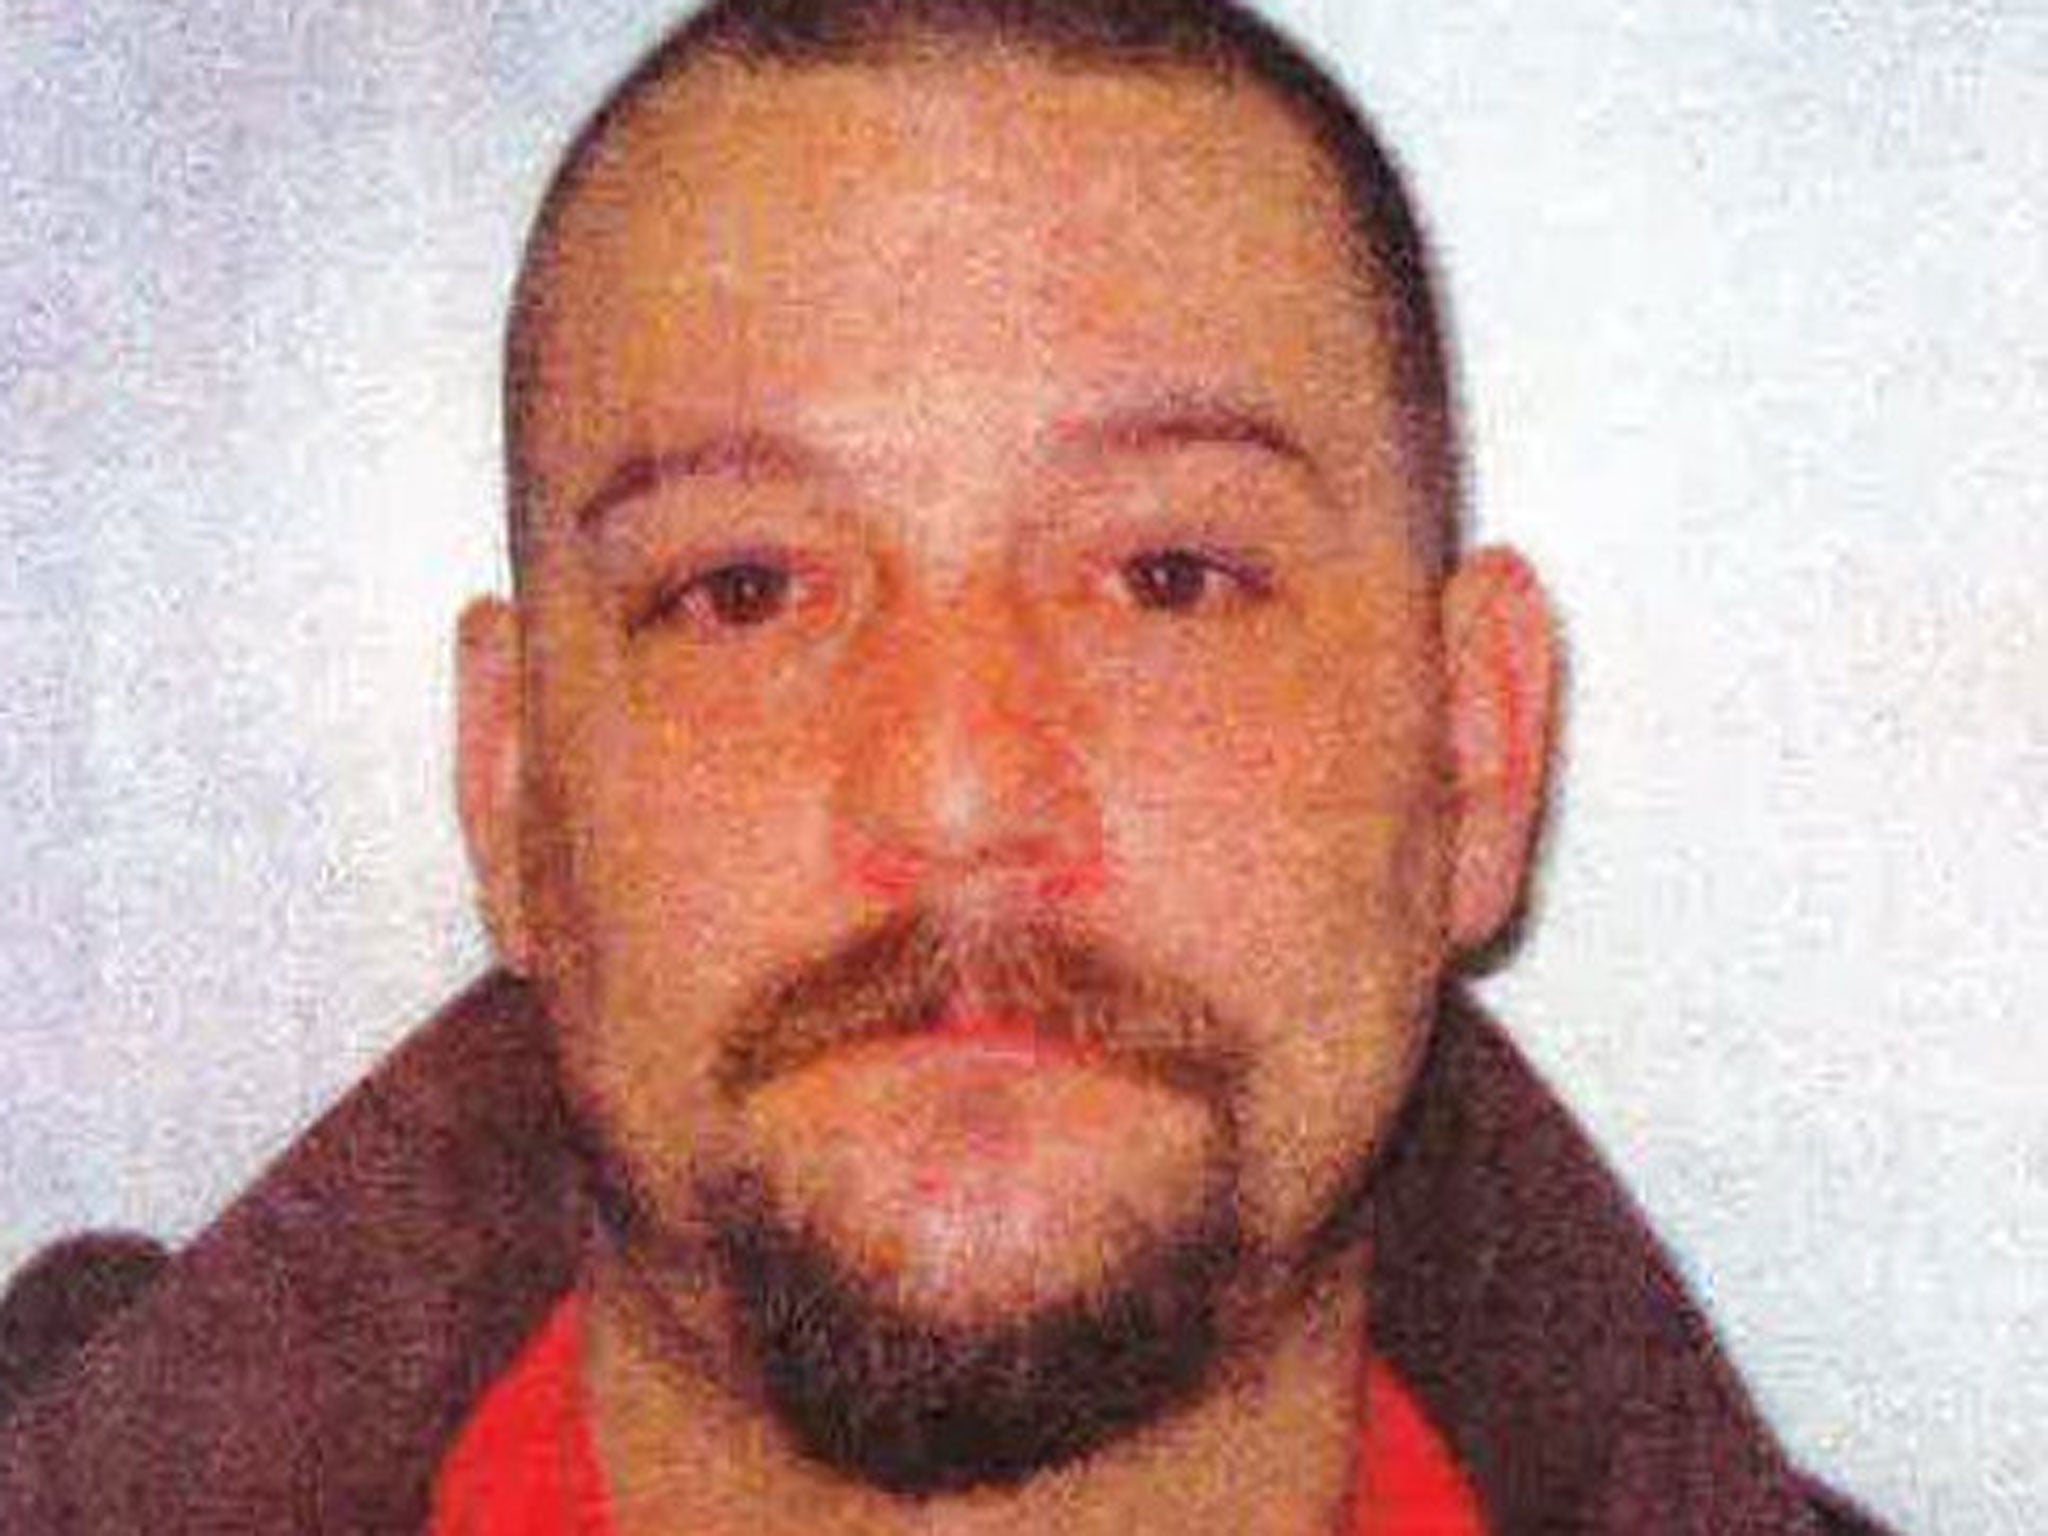 Neill Buchel, 39, has been missing in Dagenham since 13 March. Police have informed his family of the development, though were unable to confirm a link into forensic analysis could be carried out on the remains